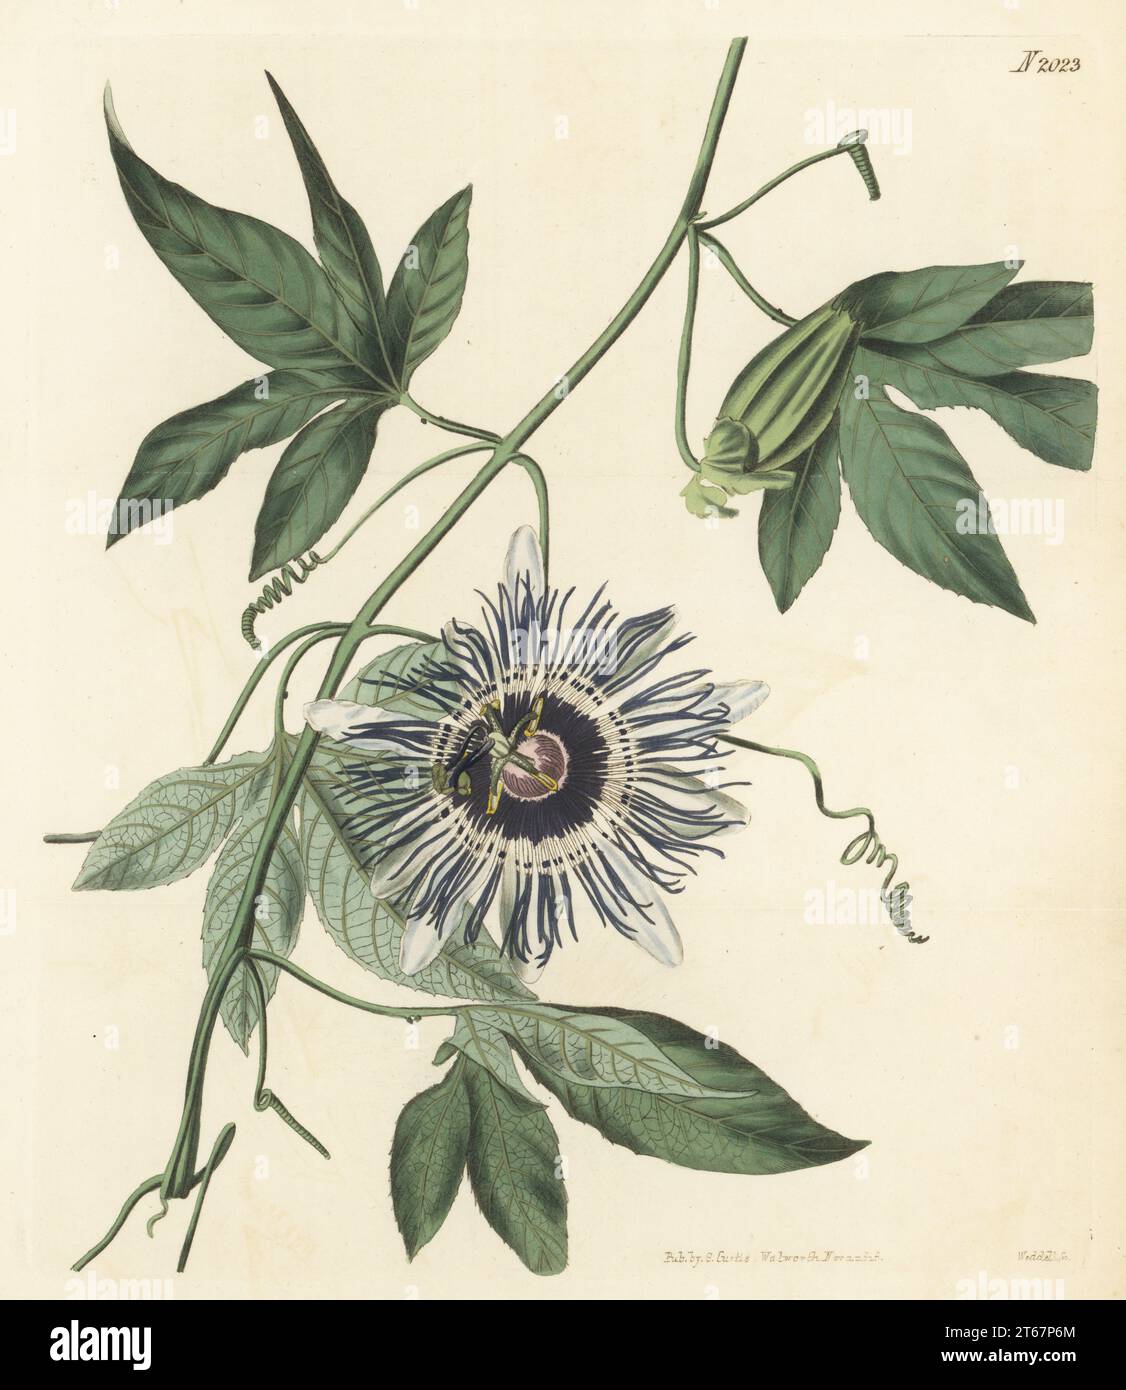 Palmate passion-flower, Passiflora filamentosa. Native to South America and Jamaica, received from nurseryman George Loddiges. Handcoloured copperplate engraving by Weddell after a botanical illustration by an unknown artist from Curtis’s Botanical Magazine, edited by John Sims, London, 1819. Stock Photo